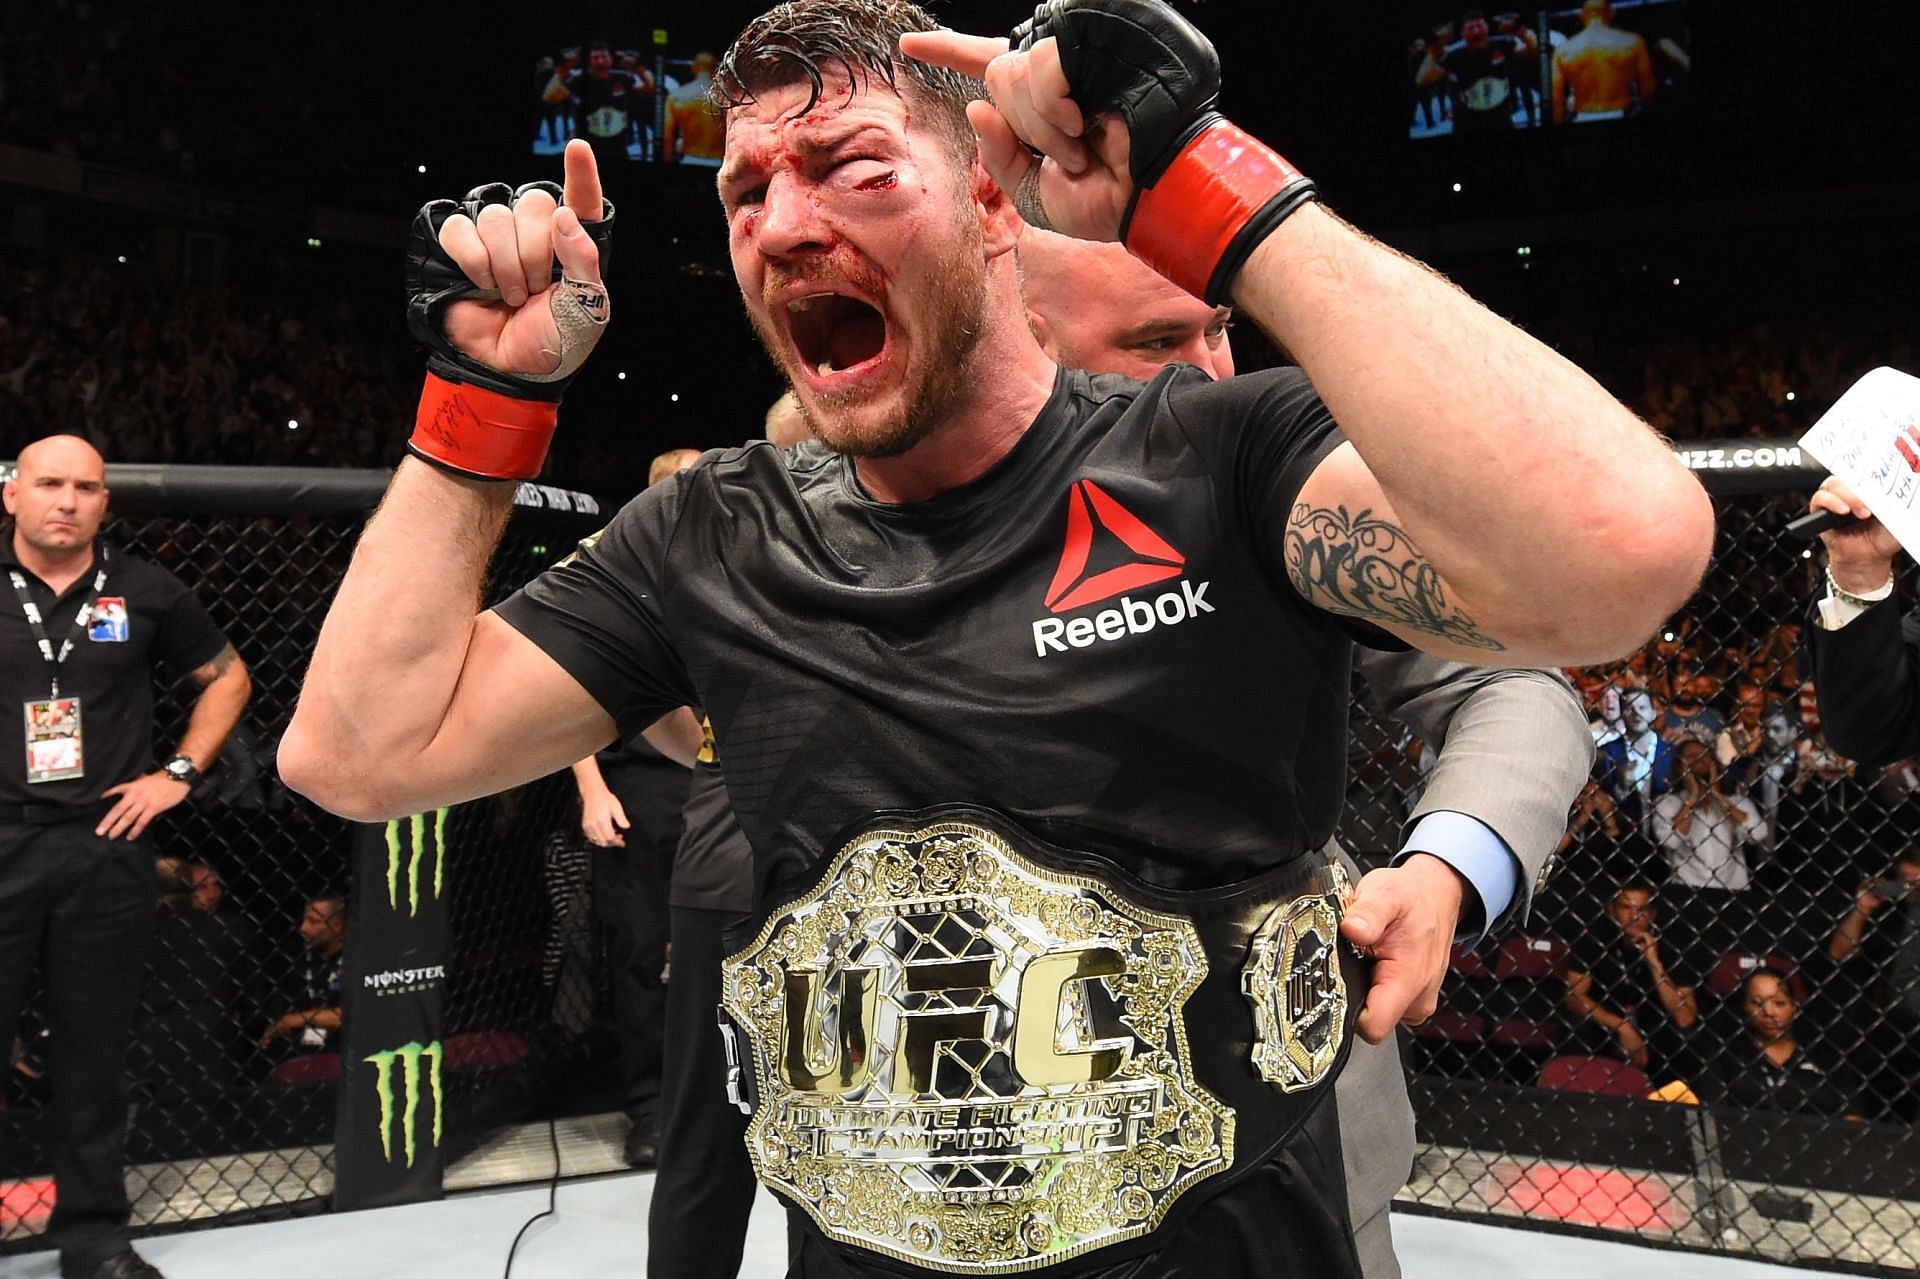 Michael Bisping produced a stirring comeback to beat old rival Dan Henderson and avenge a prior loss